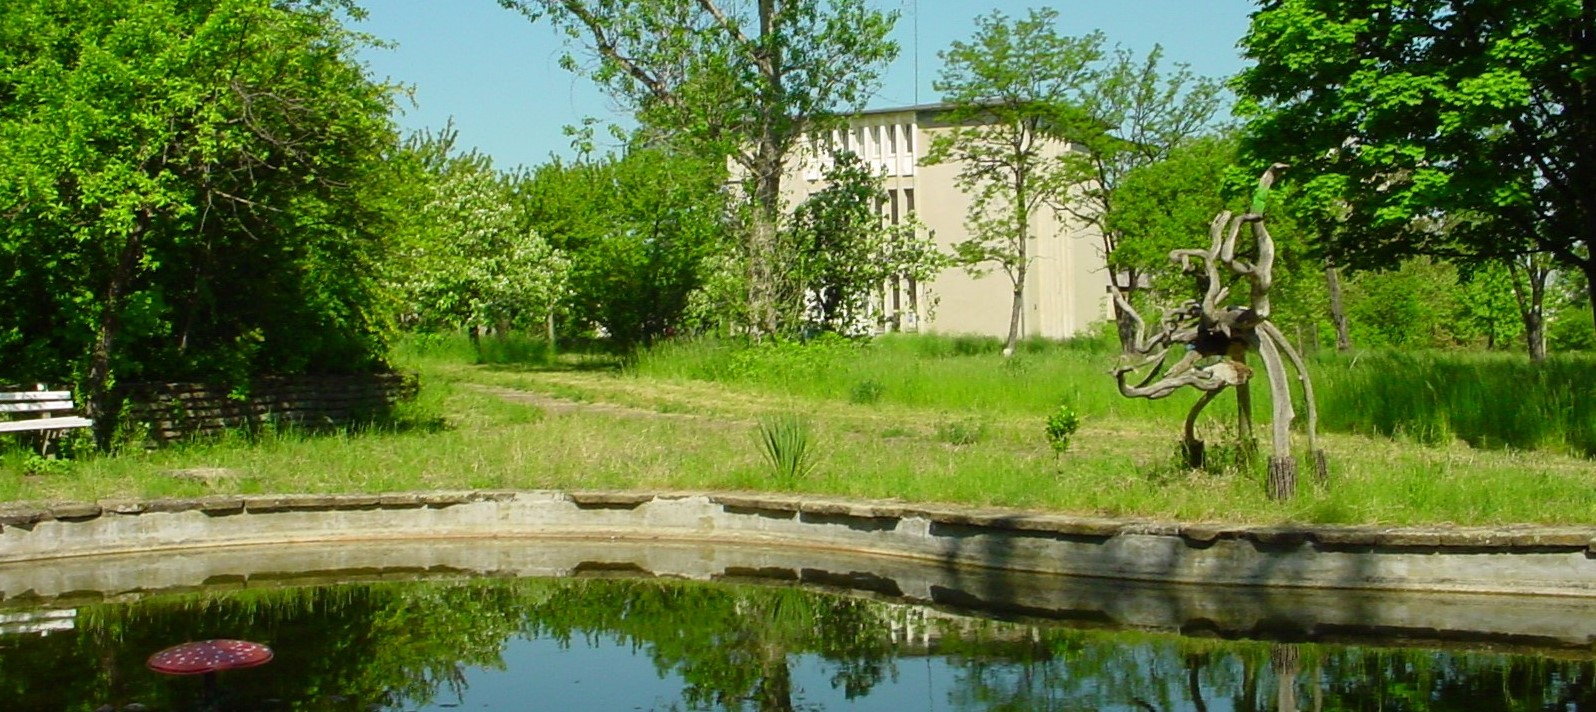 INRNE lake and Theory building